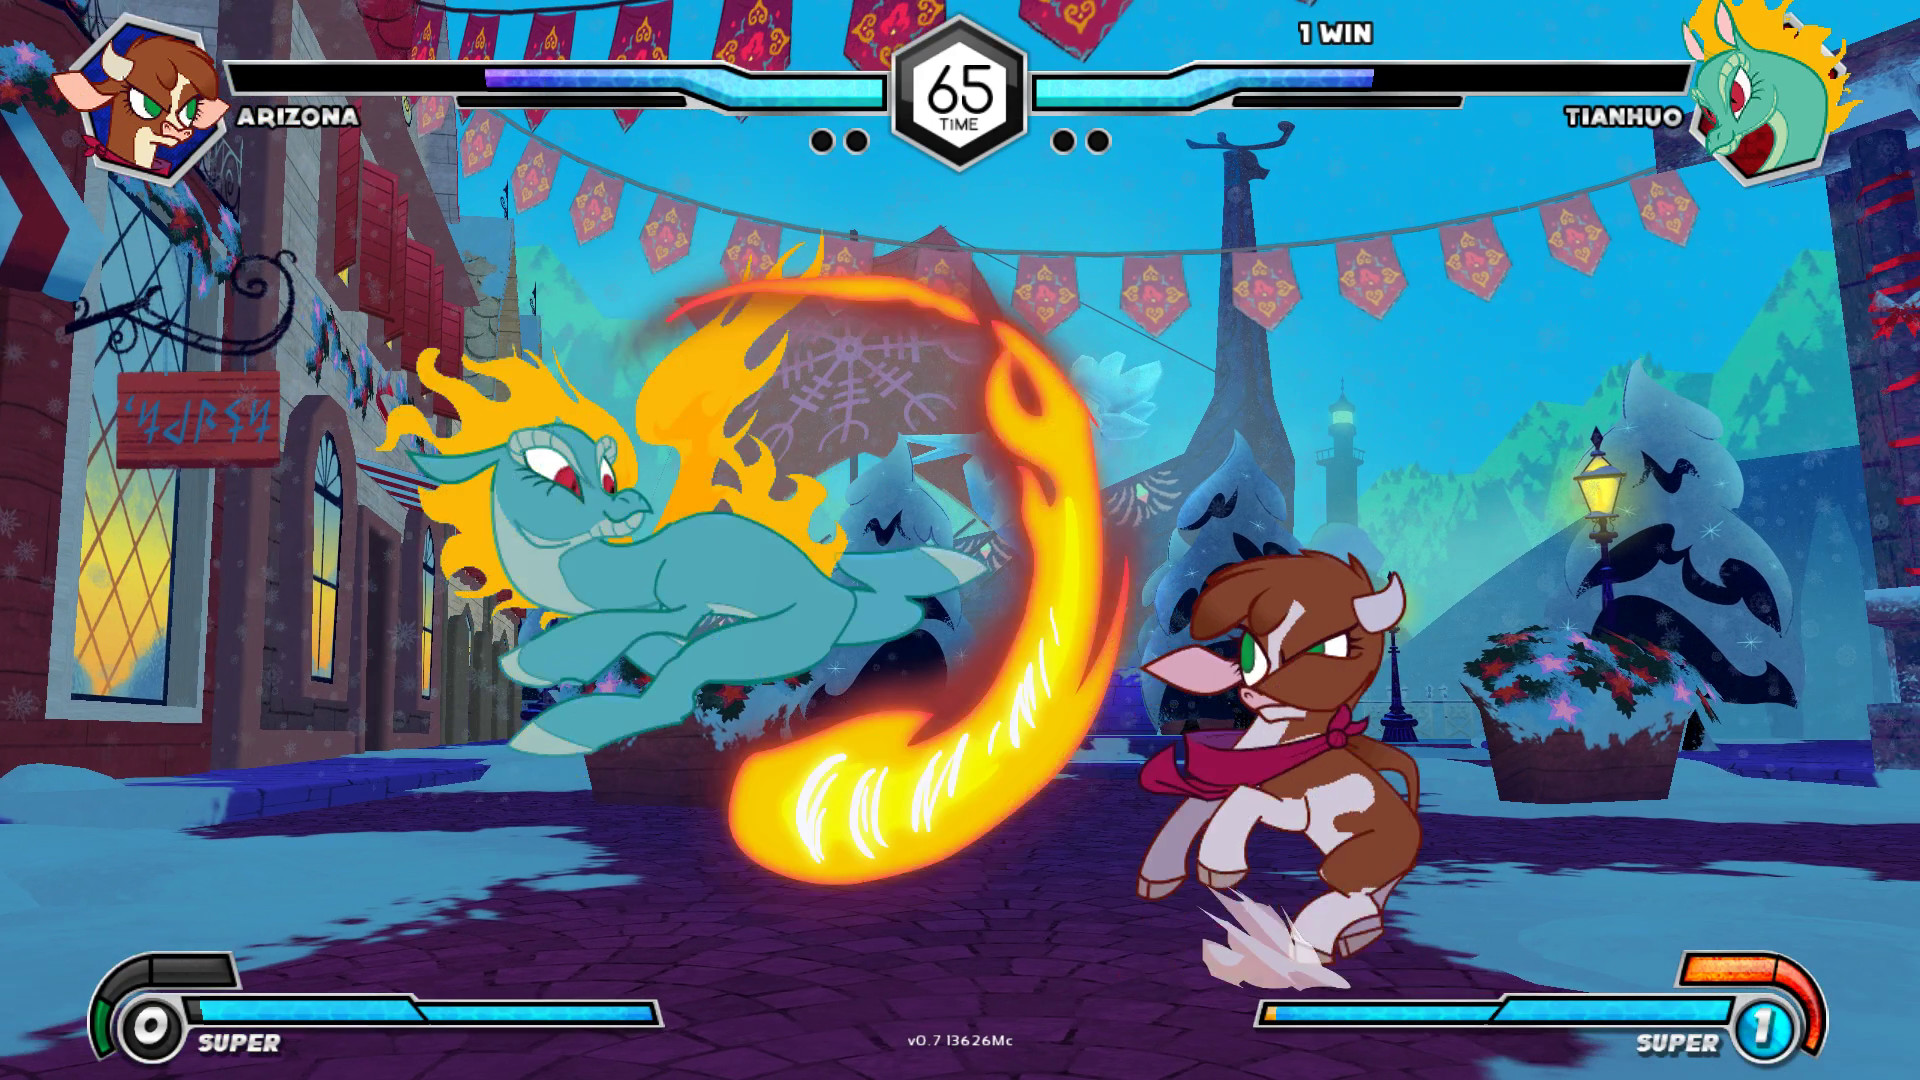 Them's Fightin' Herds gets cross-play between Steam and Consoles